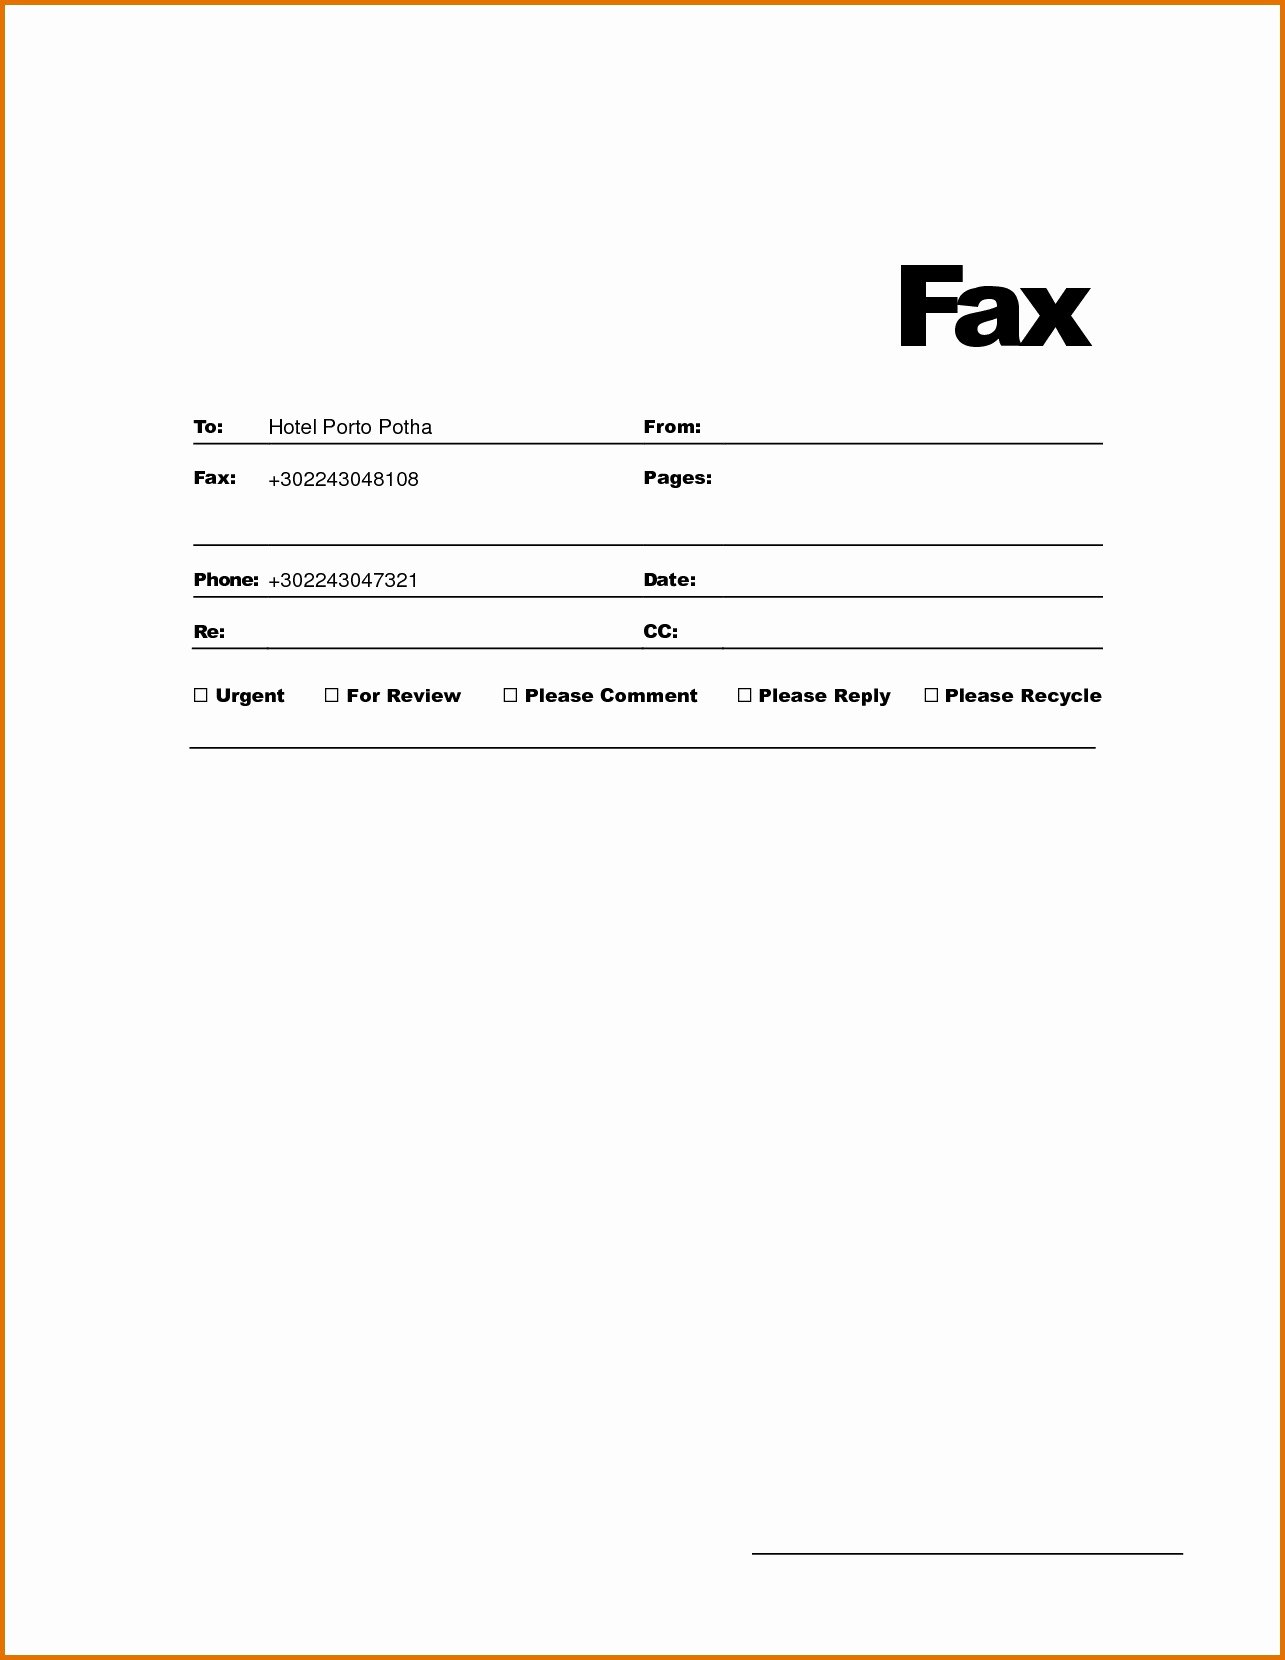 Fax Cover Sheet Download Free Google Docs Fax Template